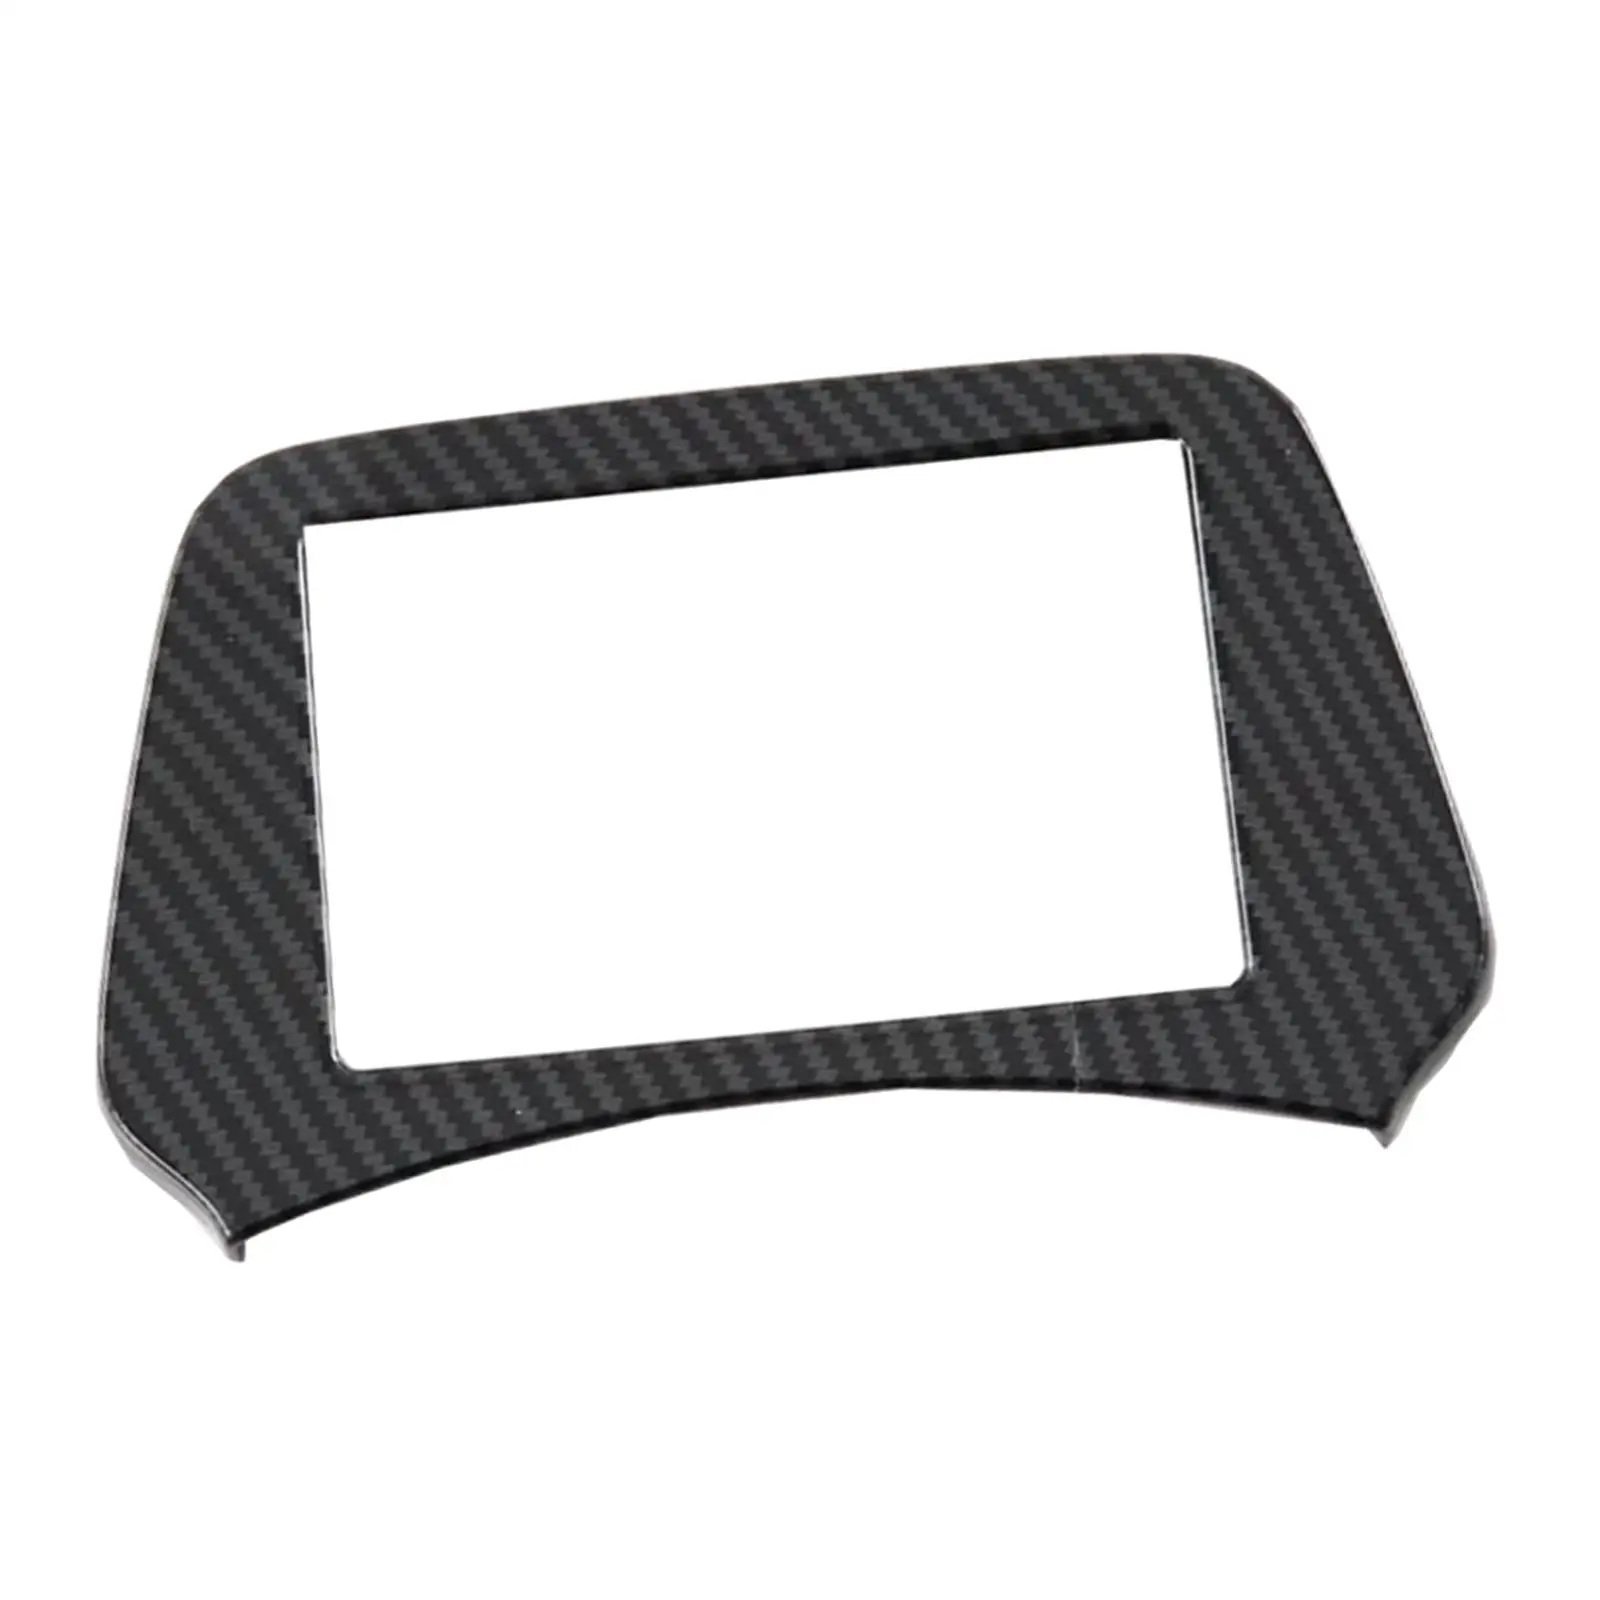 Dial Dashboard Trim Cover Frame Professional Replaces for Byd Yuan Plus